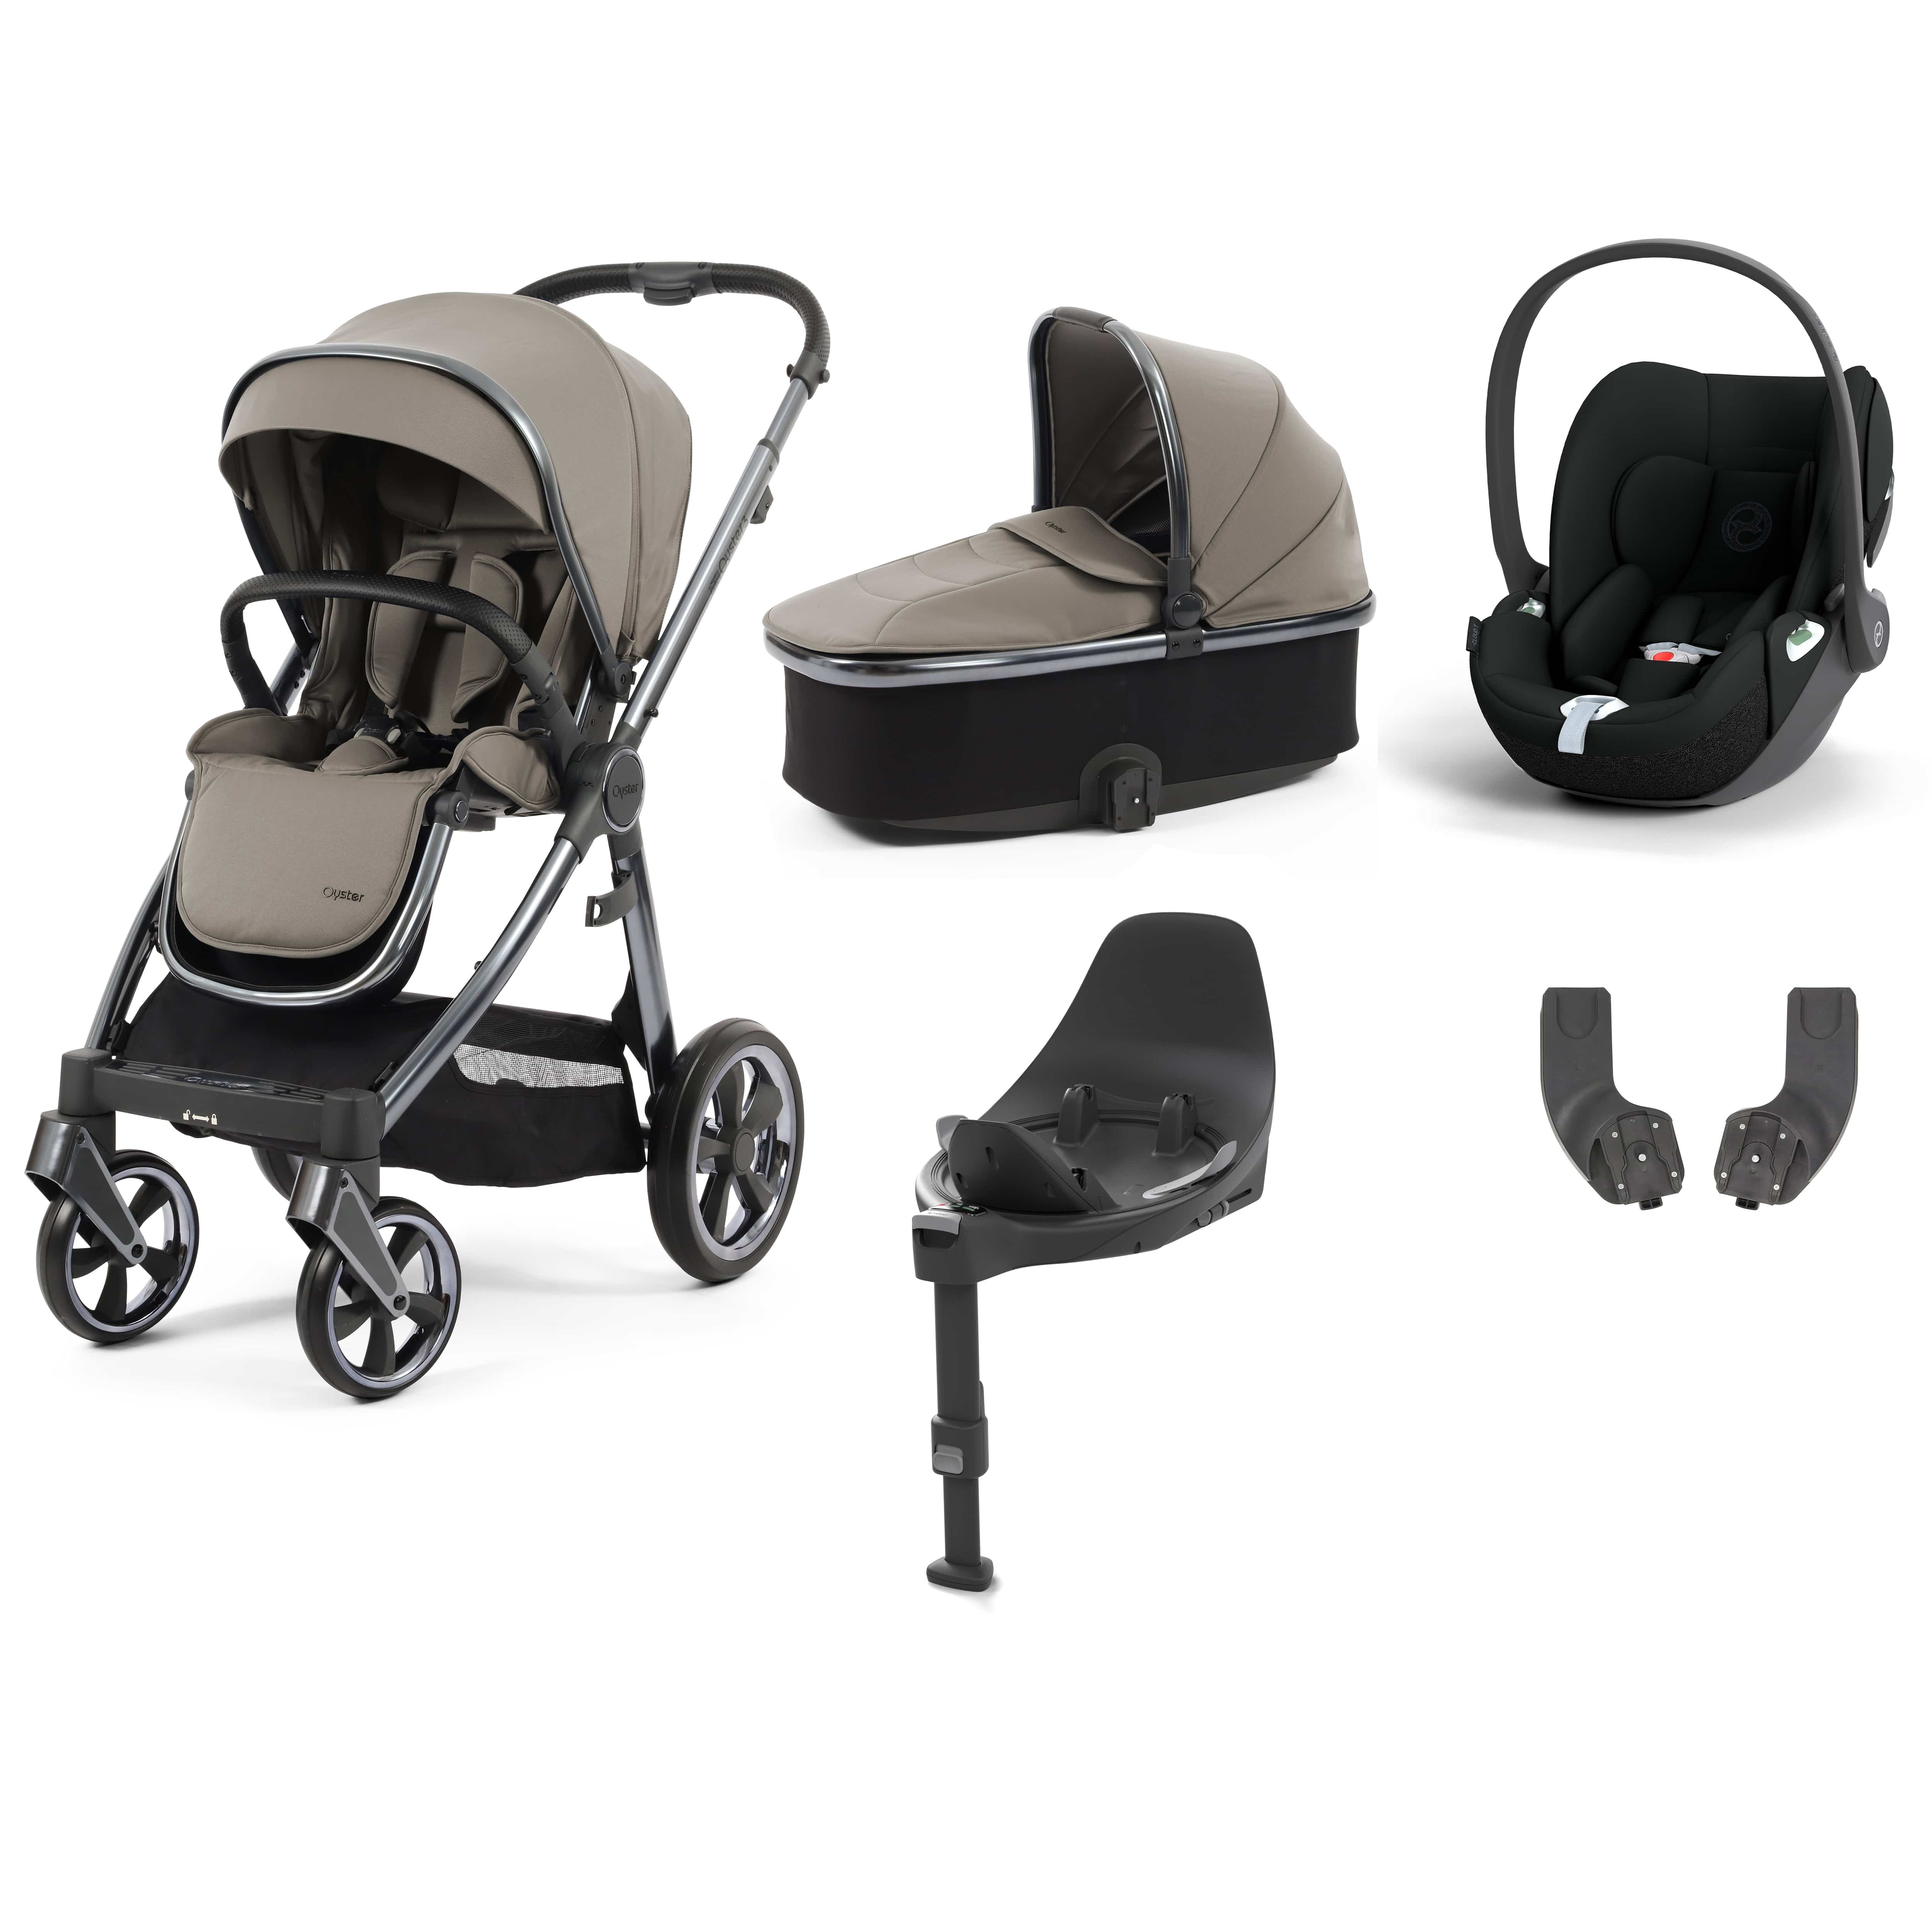 Babystyle Oyster 3 Essential Bundle with Car Seat in Stone Travel Systems 14753-STN 5060711567259